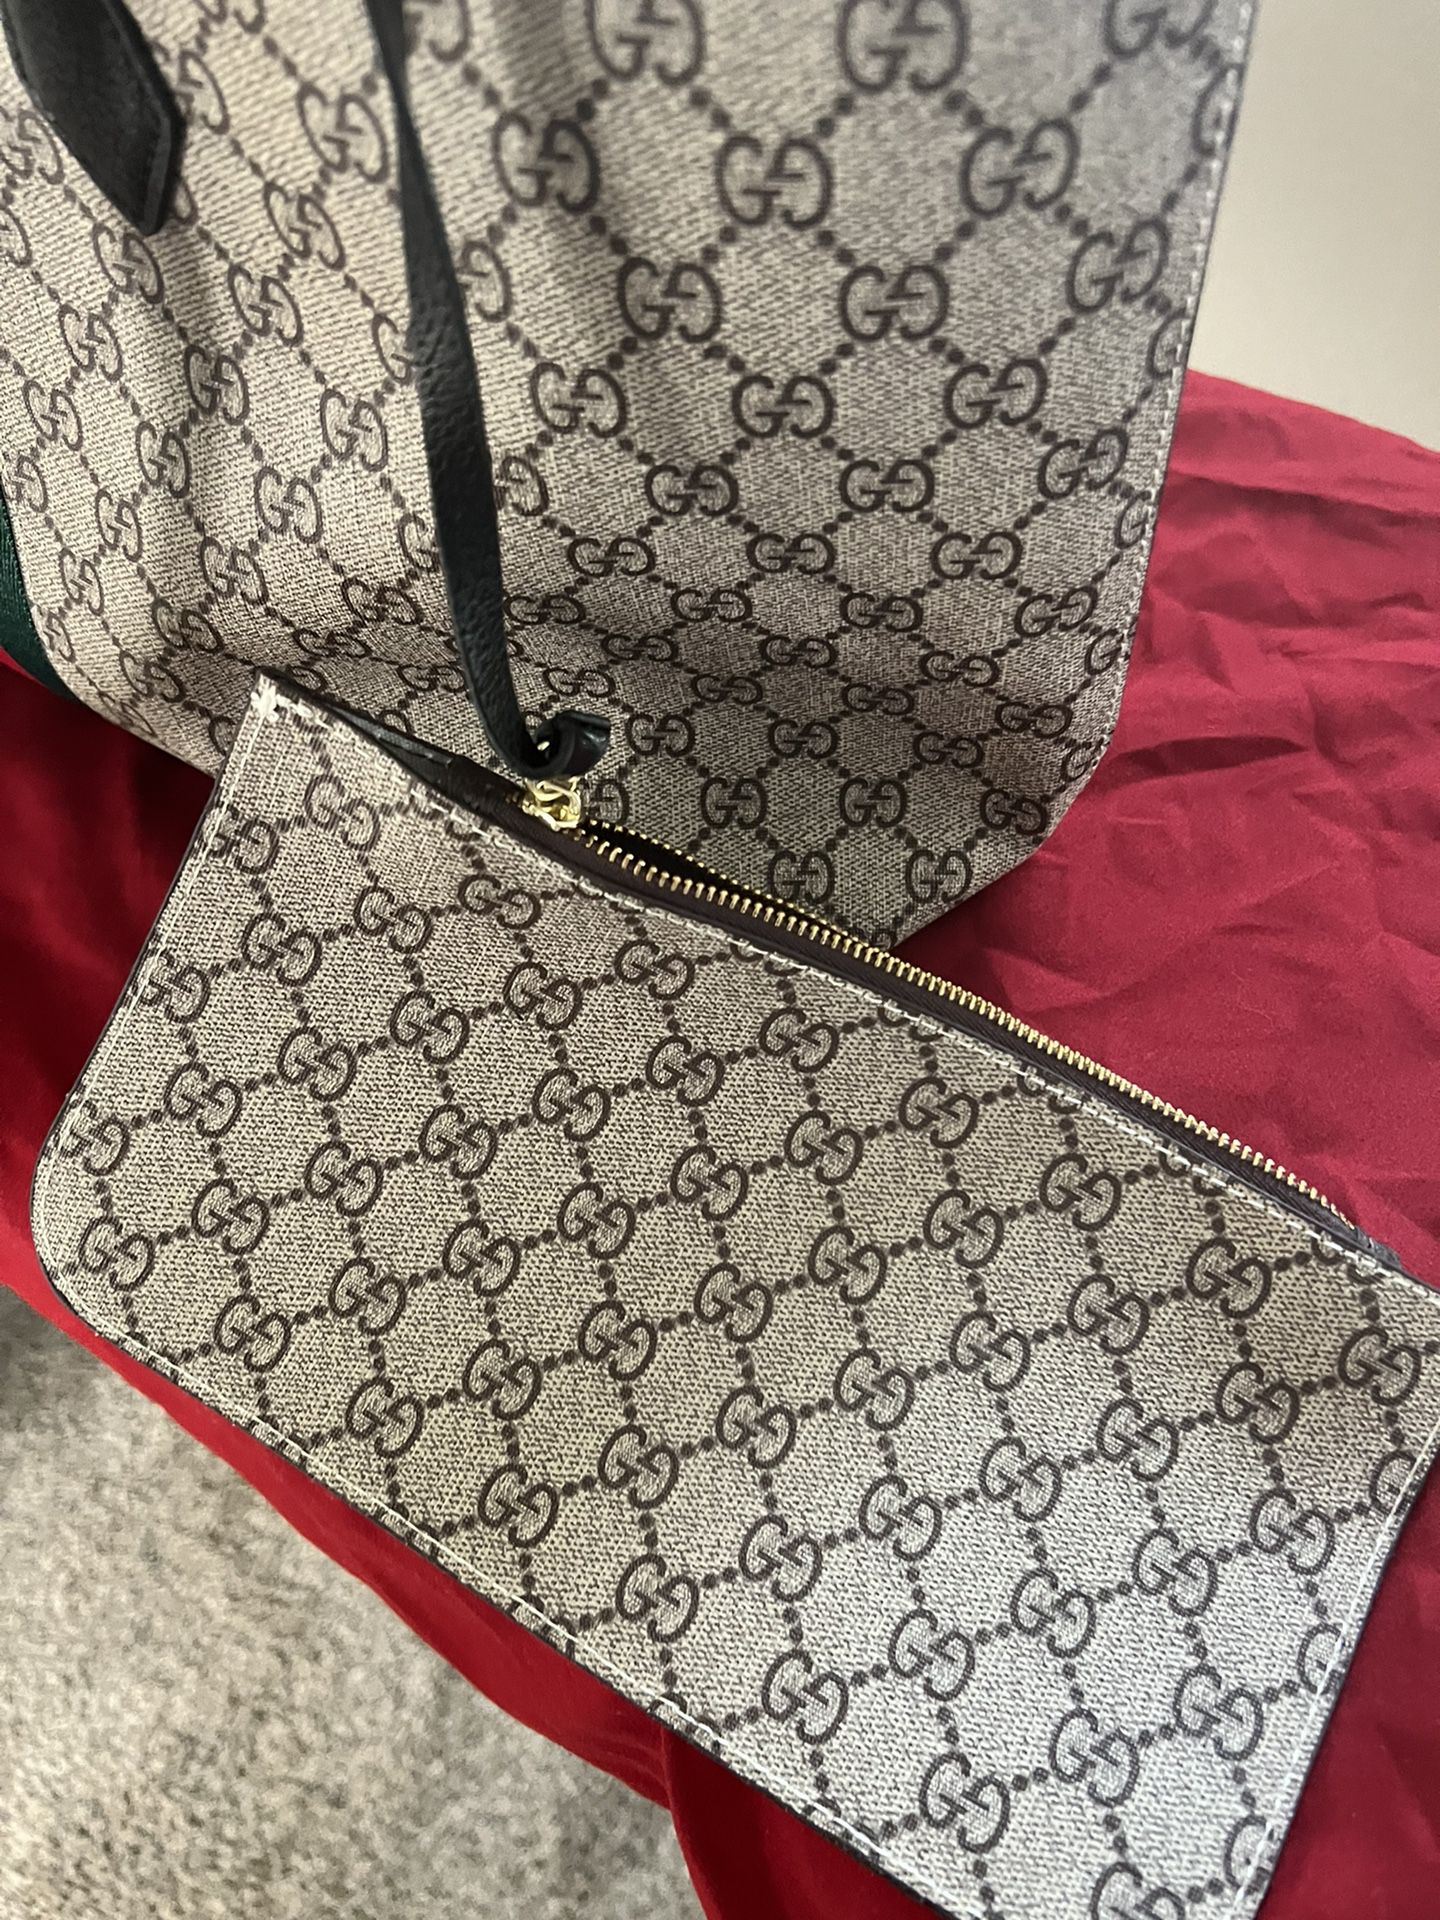 Ophidia GG Large tote